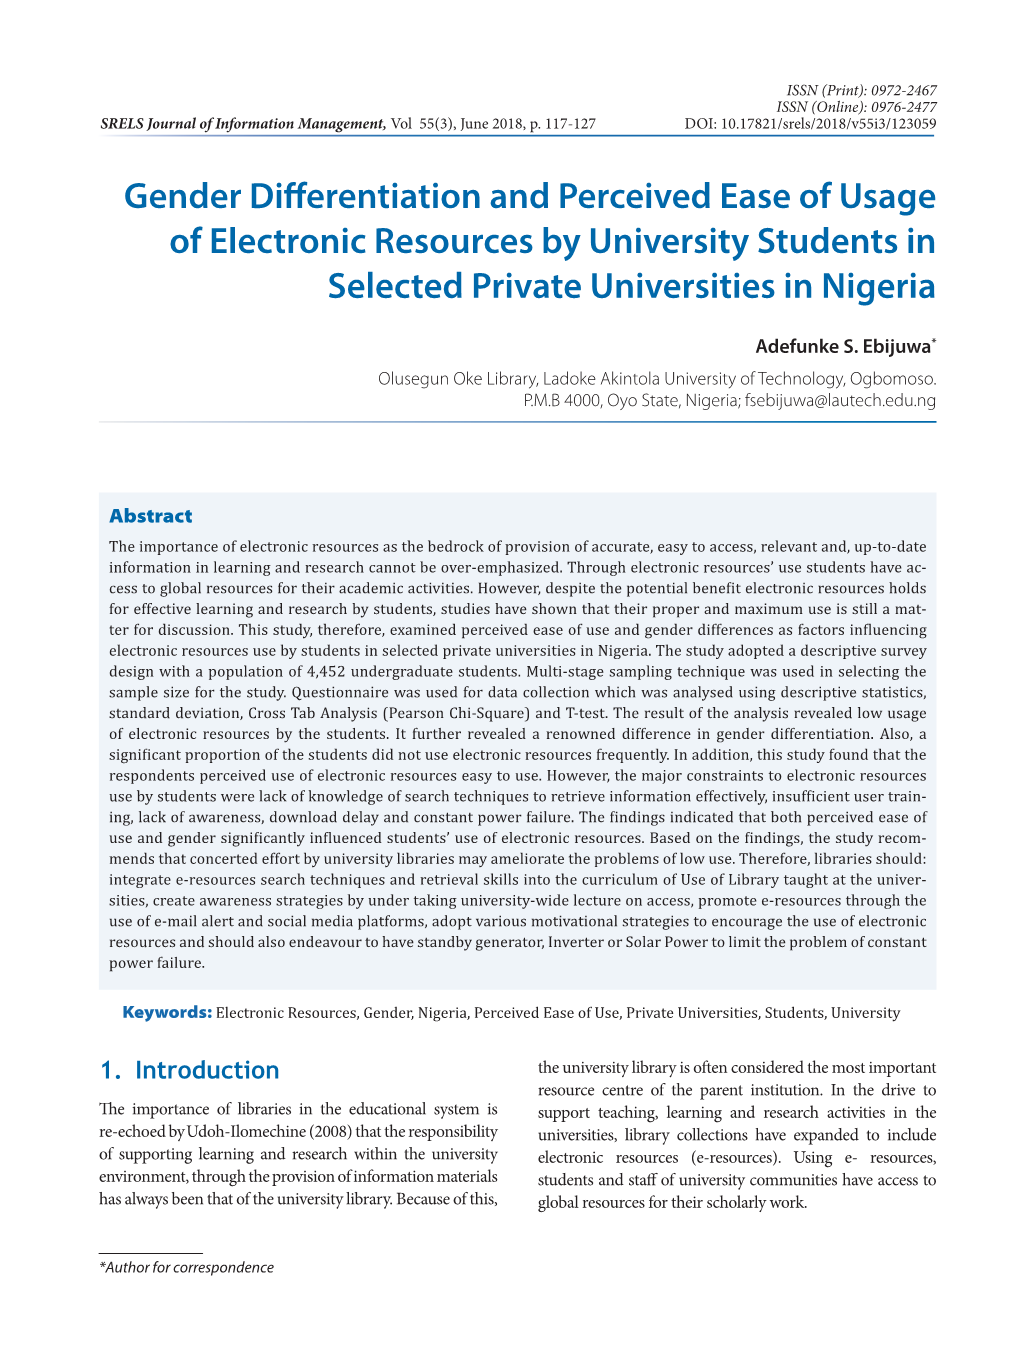 Gender Differentiation and Perceived Ease of Usage of Electronic Resources by University Students in Selected Private Universities in Nigeria